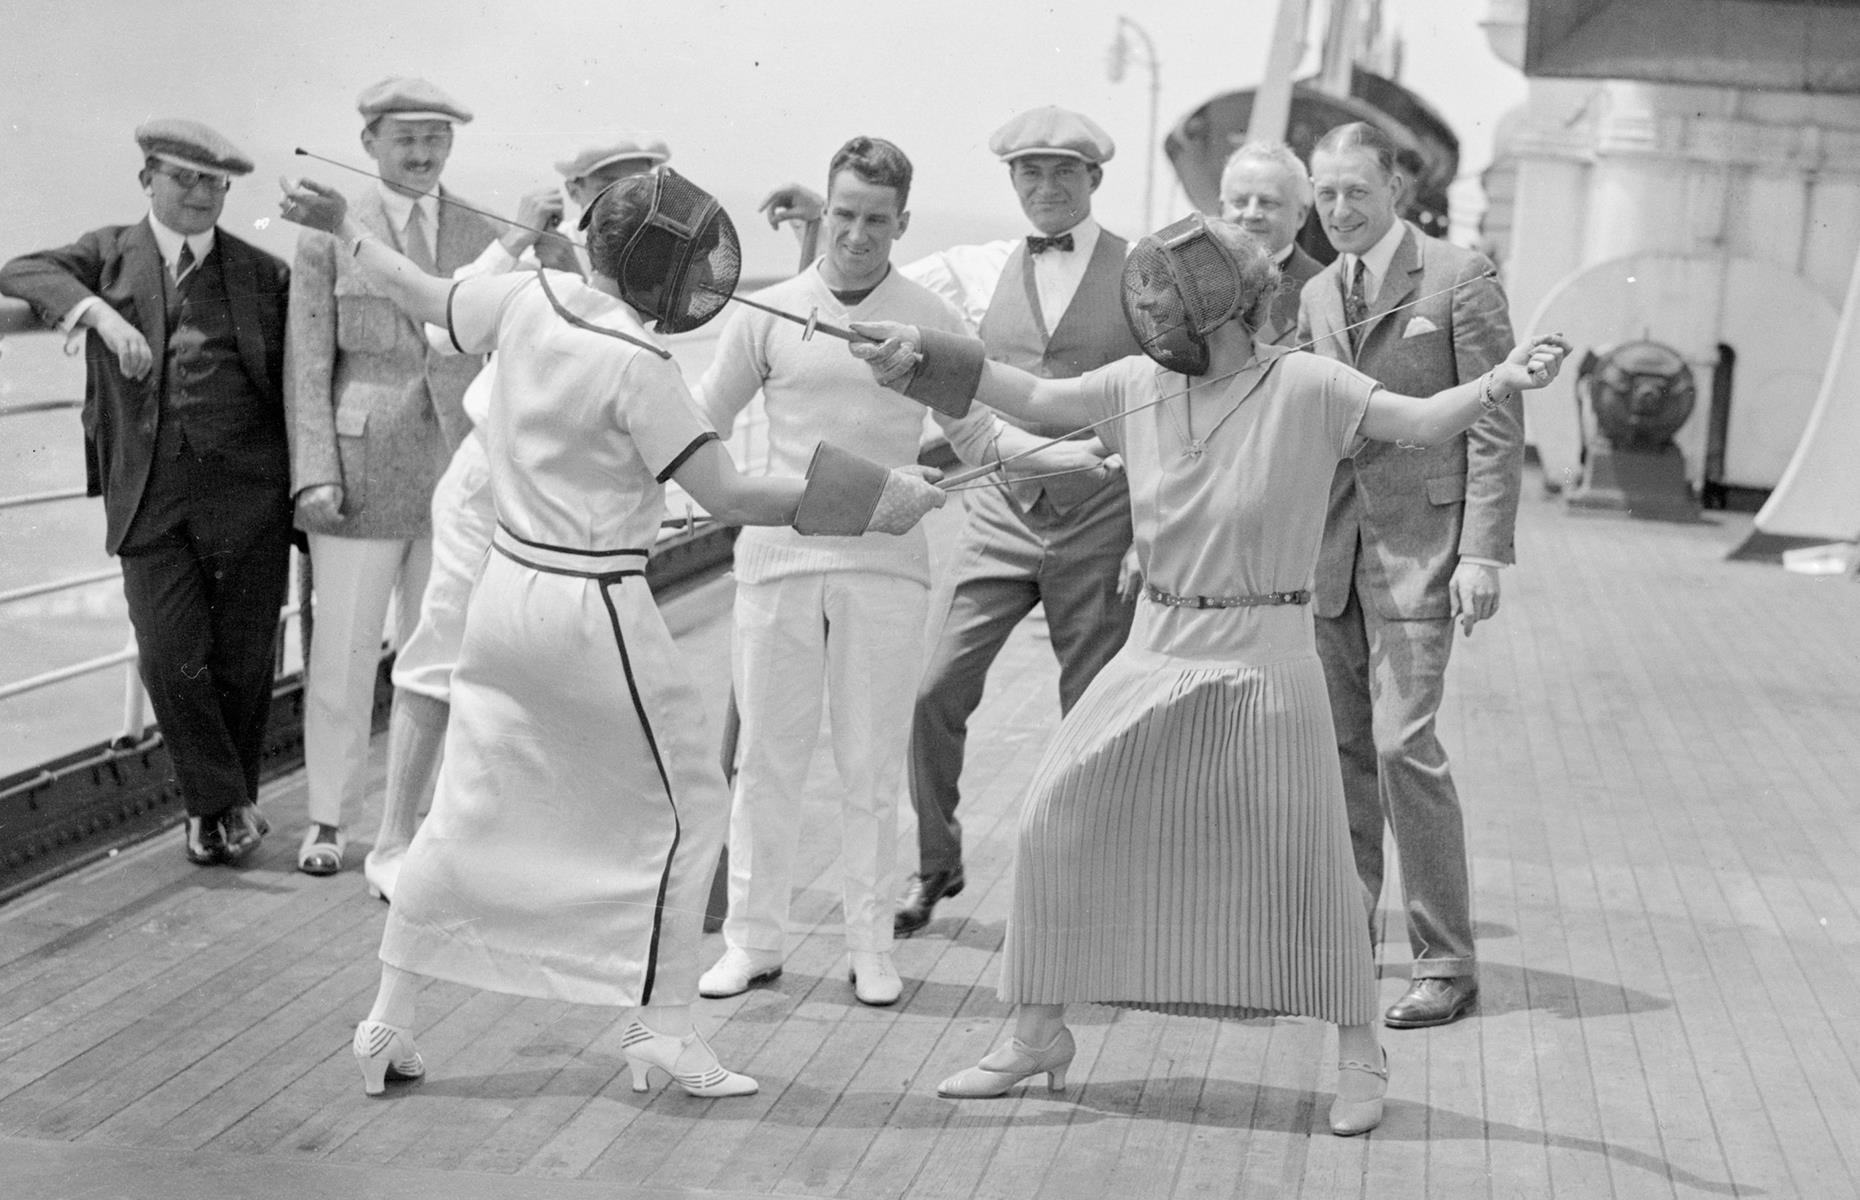 In the Roaring Twenties, onboard entertainment was still focused around fun deck games and sports. Here spectators look on in delight as a pair of women take part in a fencing duel aboard Cunard's Berengaria (formerly Hamburg America Line's Imperator). The shot was taken in 1923.